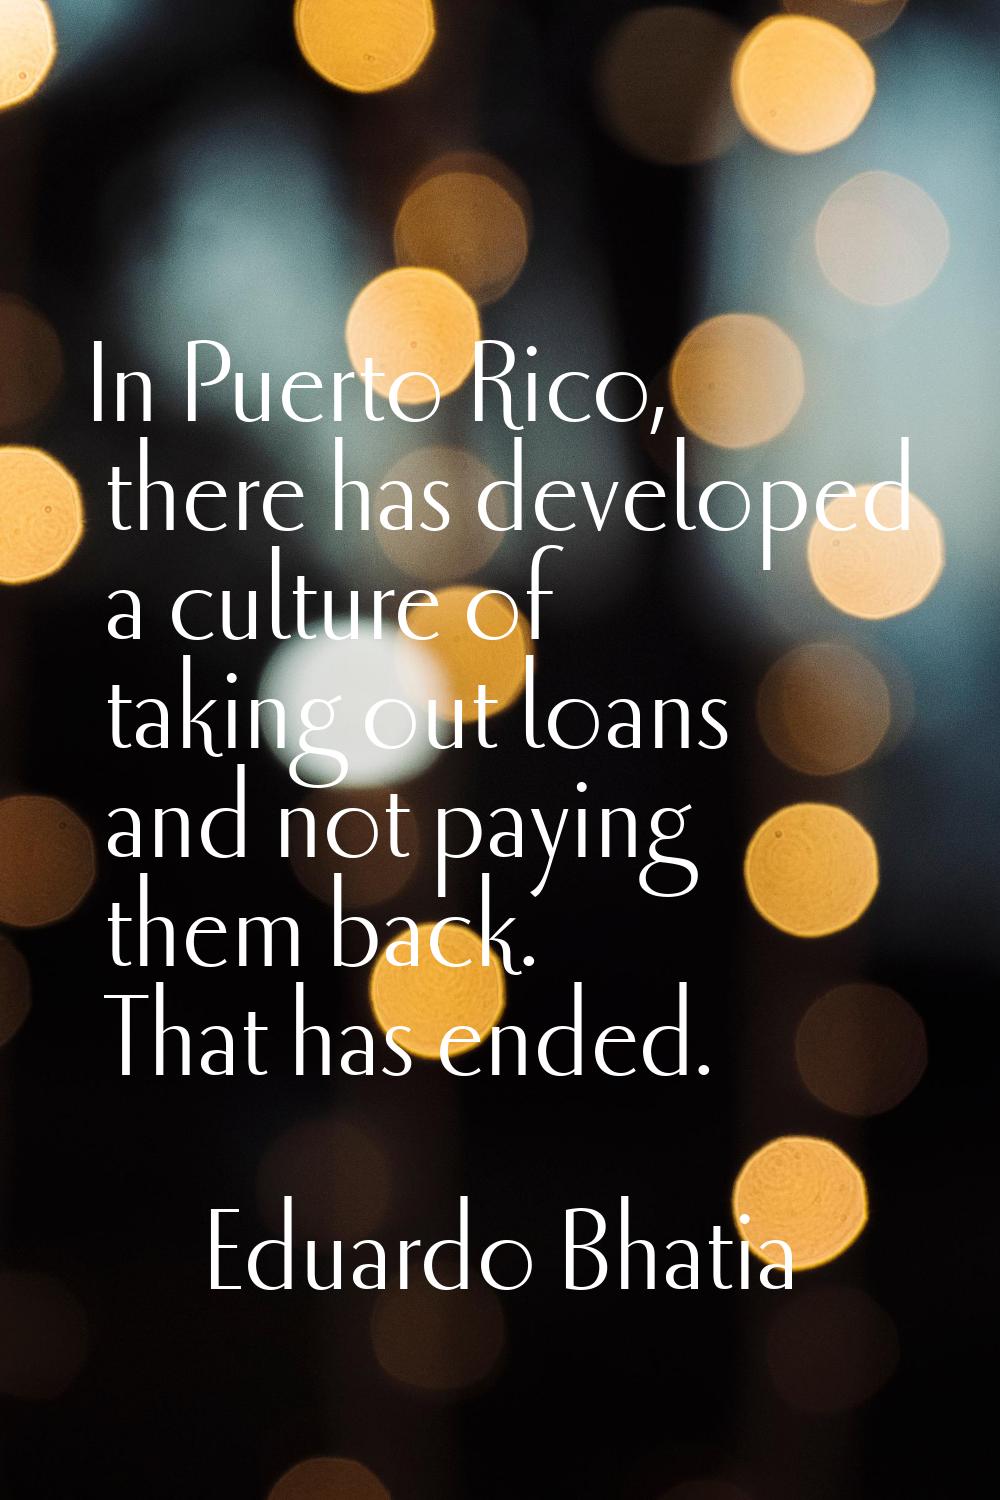 In Puerto Rico, there has developed a culture of taking out loans and not paying them back. That ha